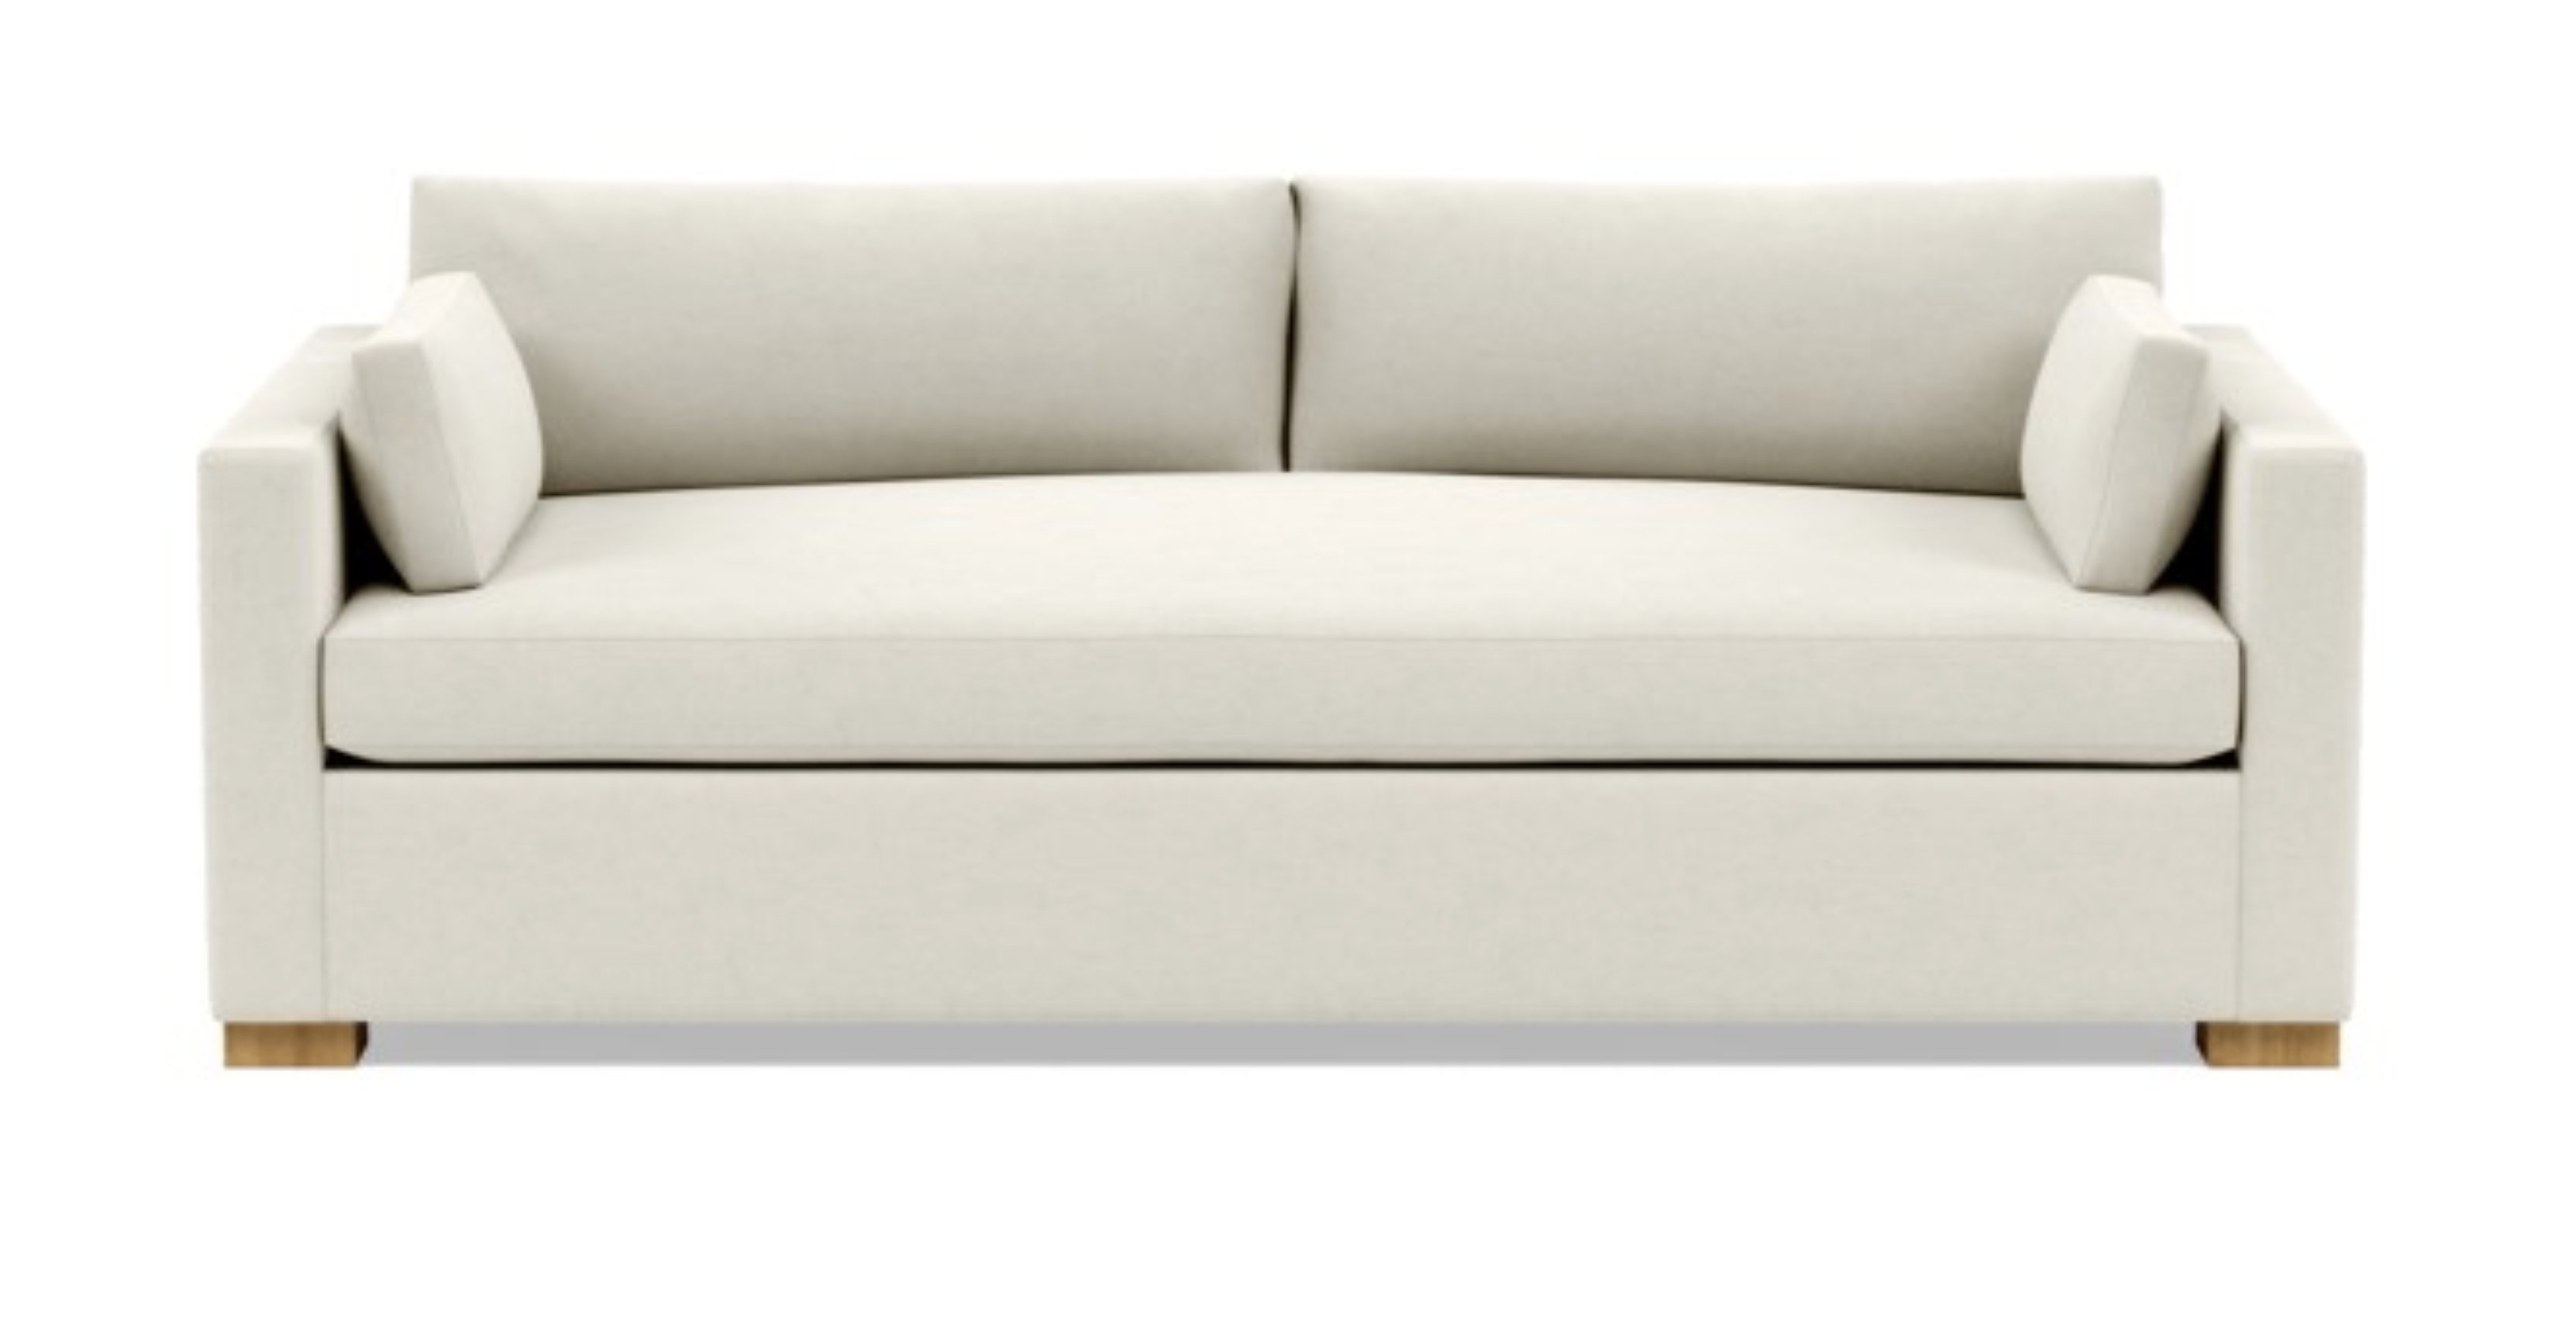 Charly Sofa with White Chalk Fabric, down alternative cushions, and Natural Oak legs - Image 0